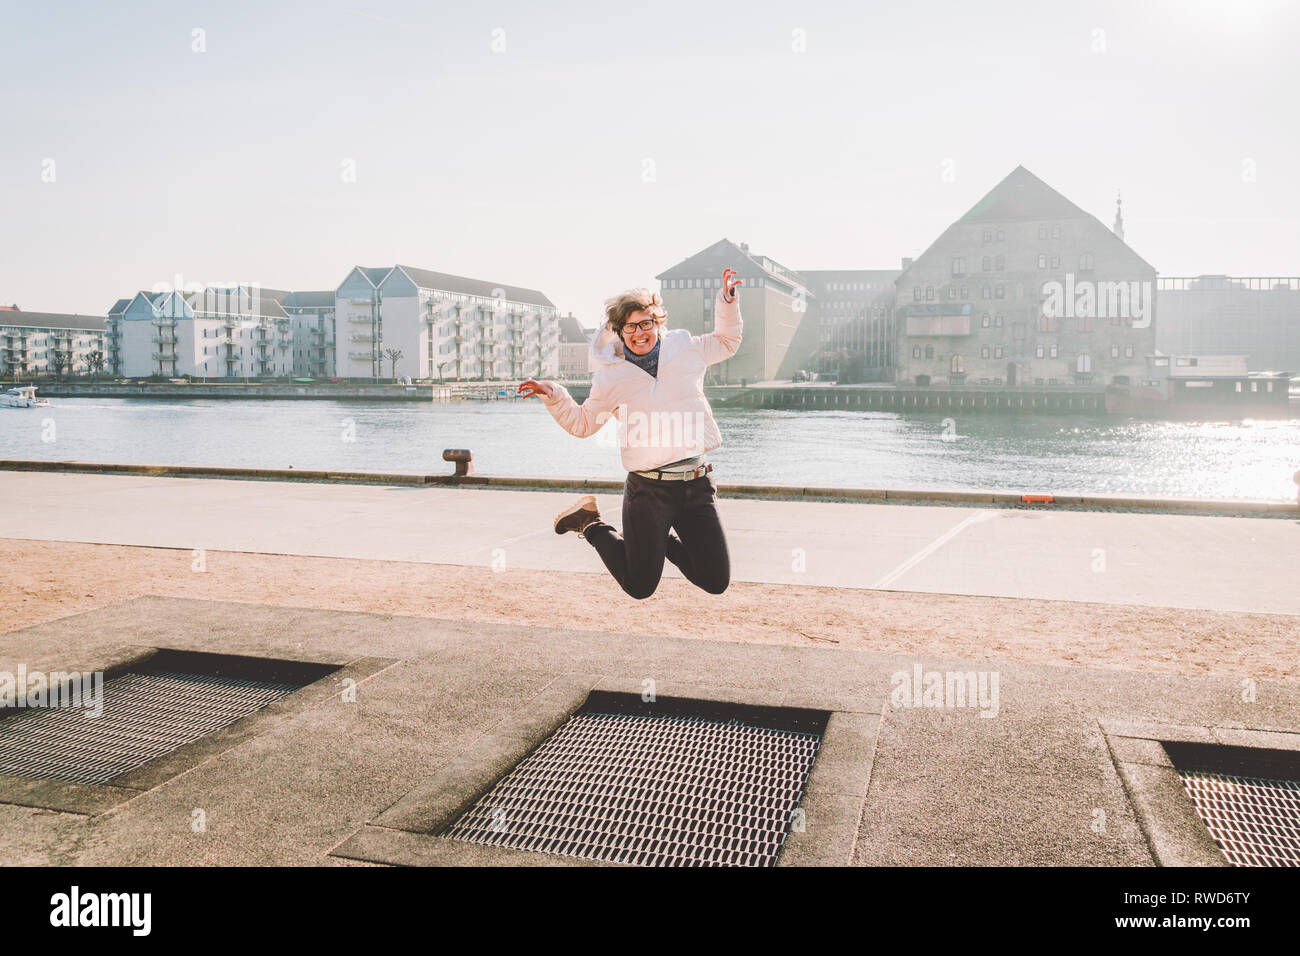 adult person rejoices like child. Playground trampoline in ground, children trampoline, springs throws people up fun and cool. Copenhagen River Embank Stock Photo